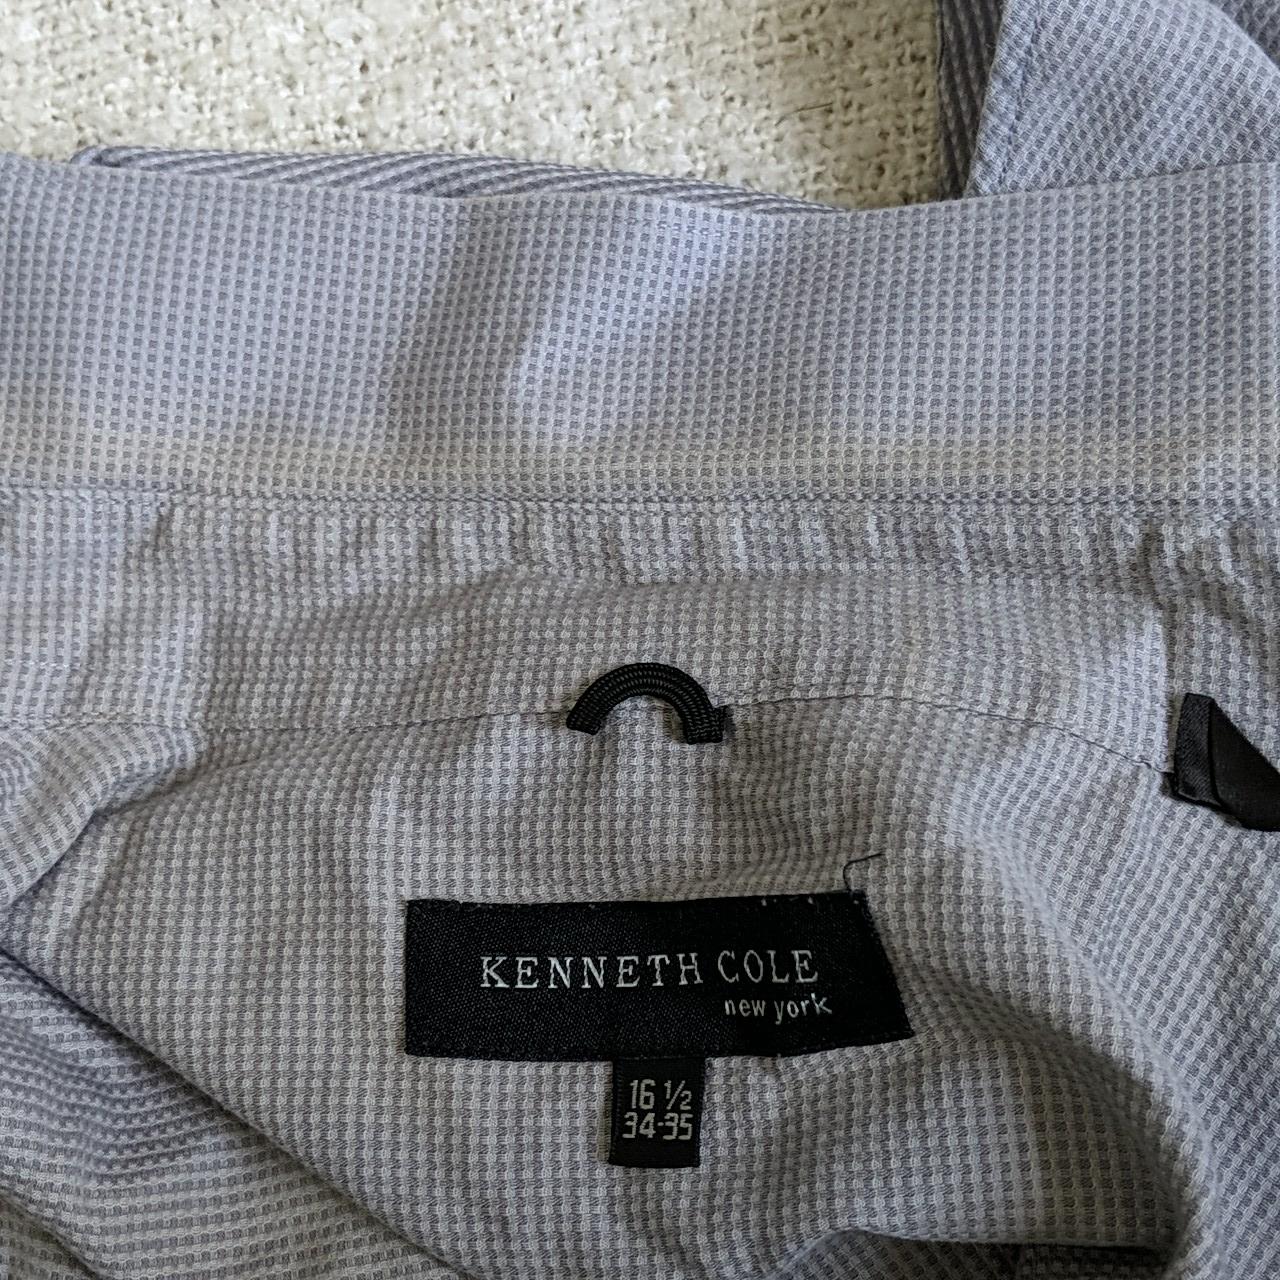 Kenneth Cole Men's Grey and Silver Shirt (4)